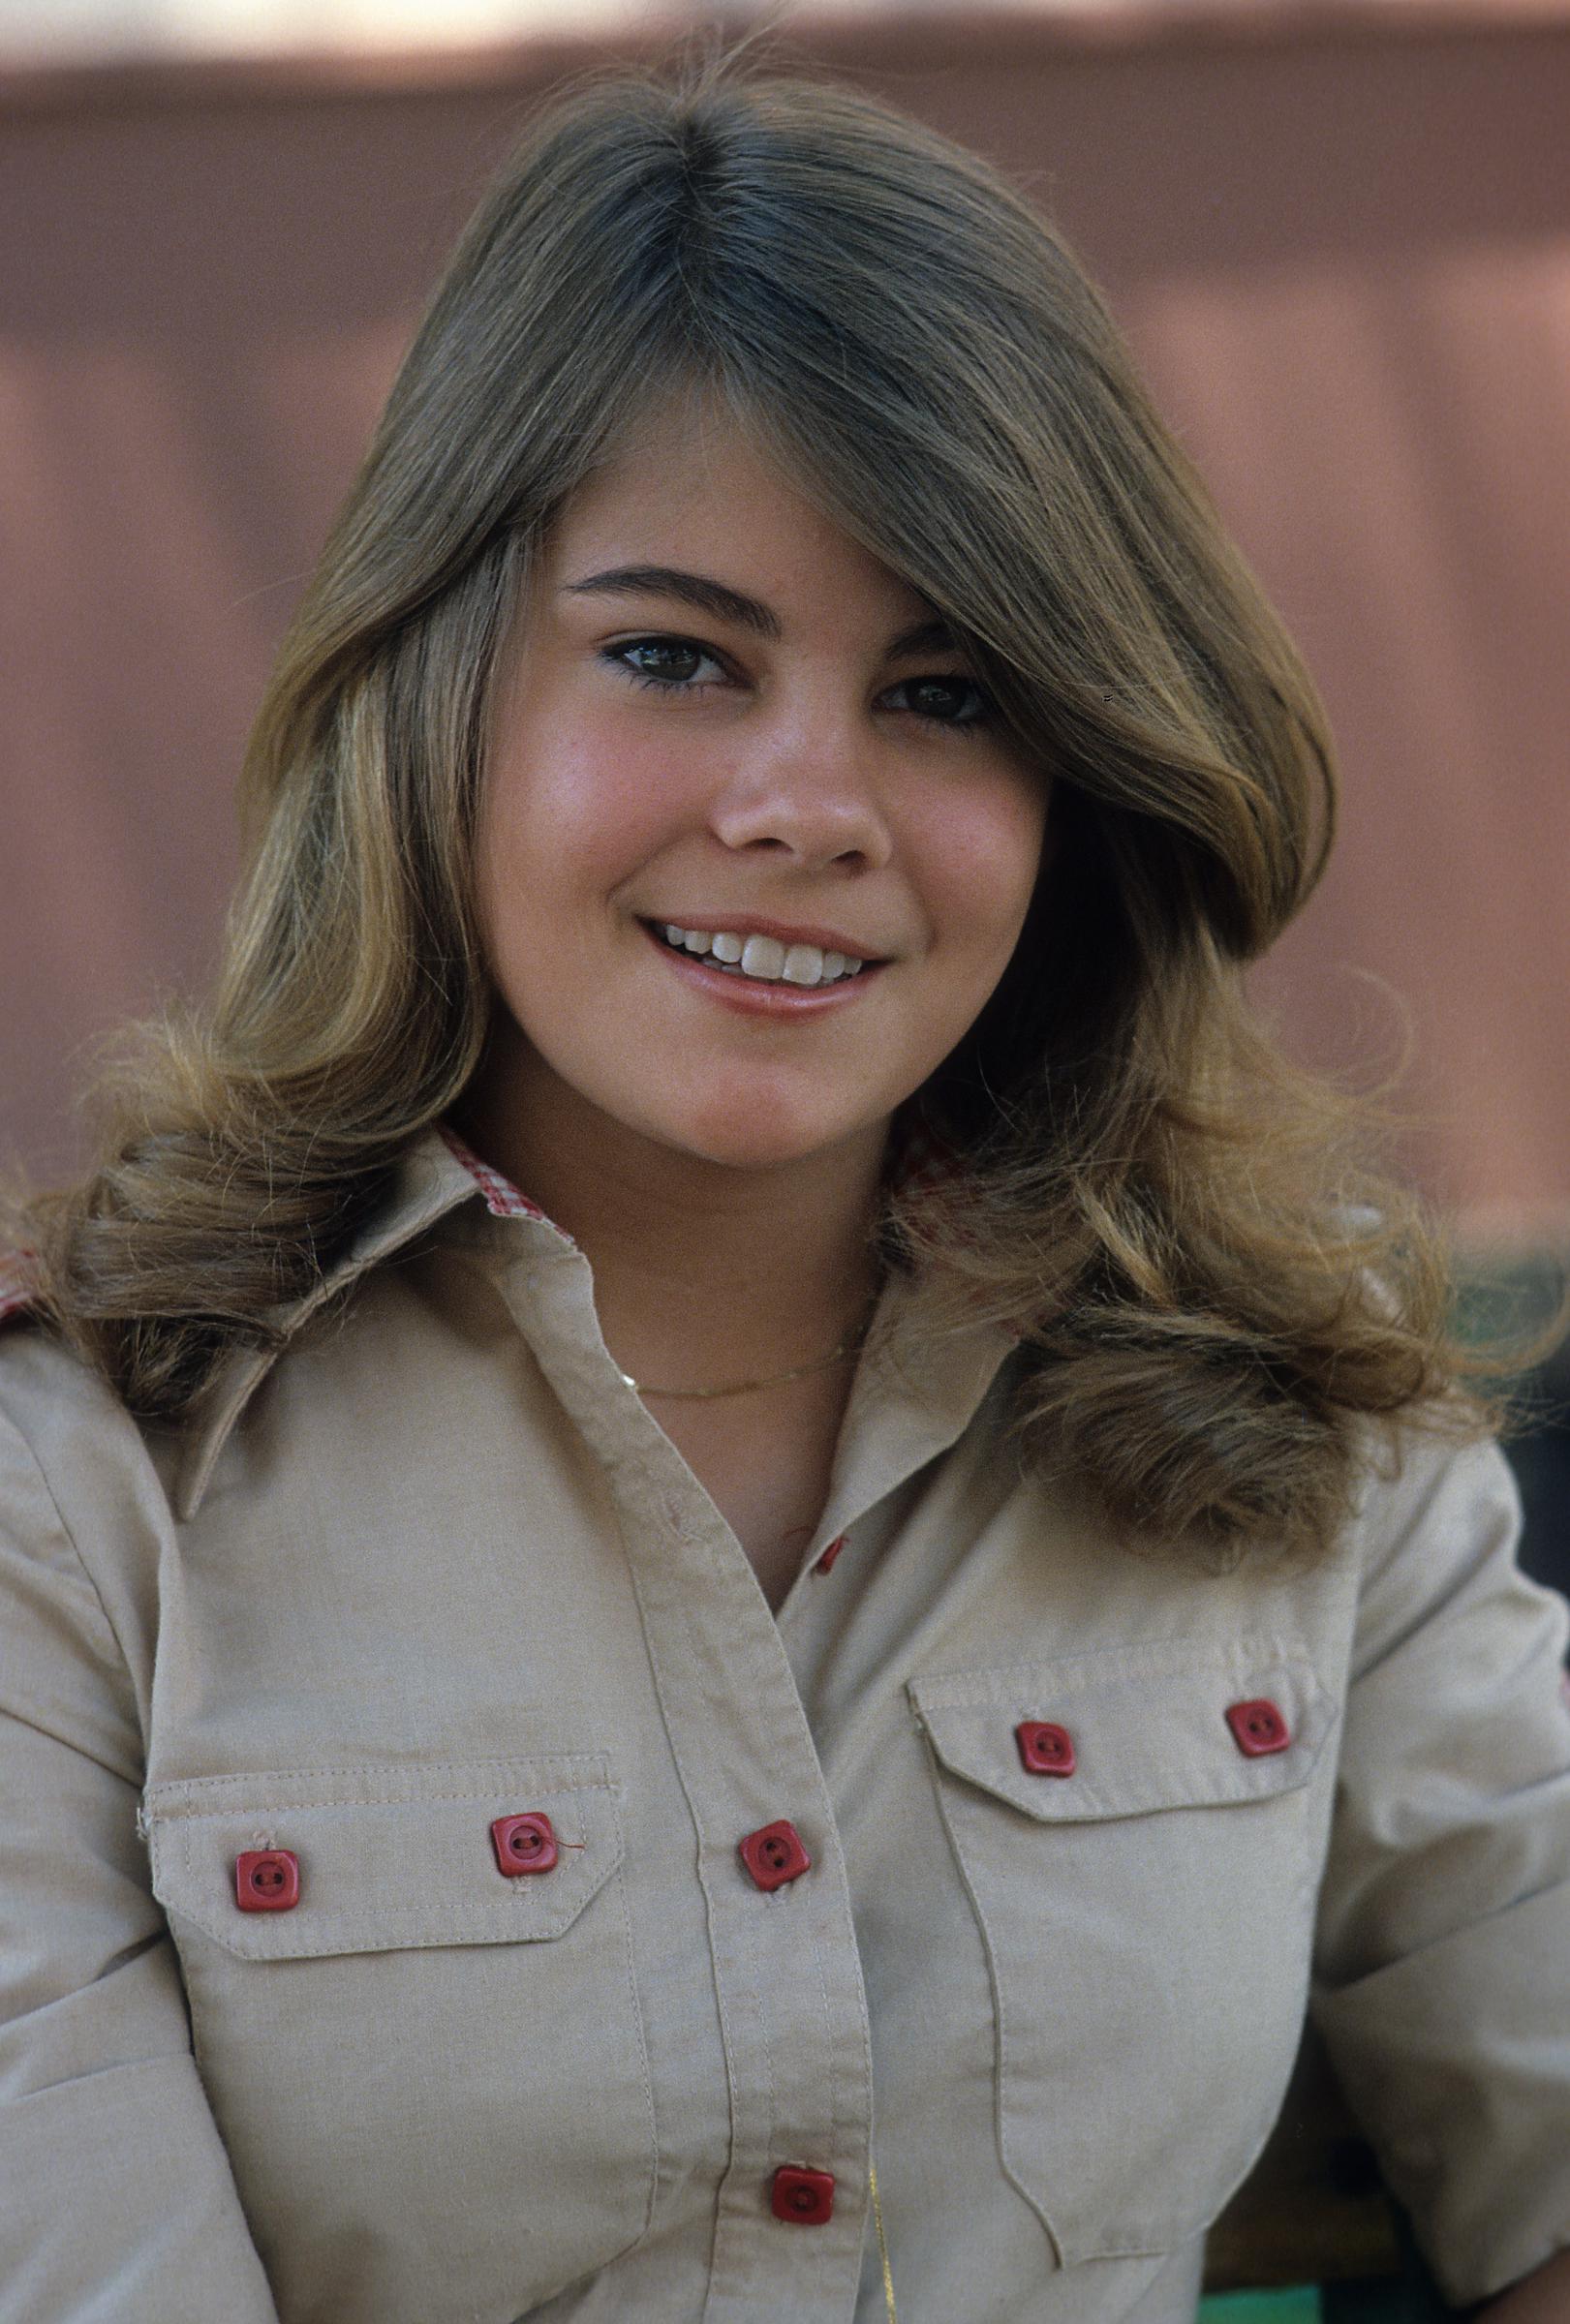 Lisa Whelchel photographed on May 1, 1978 | Source: Getty Images